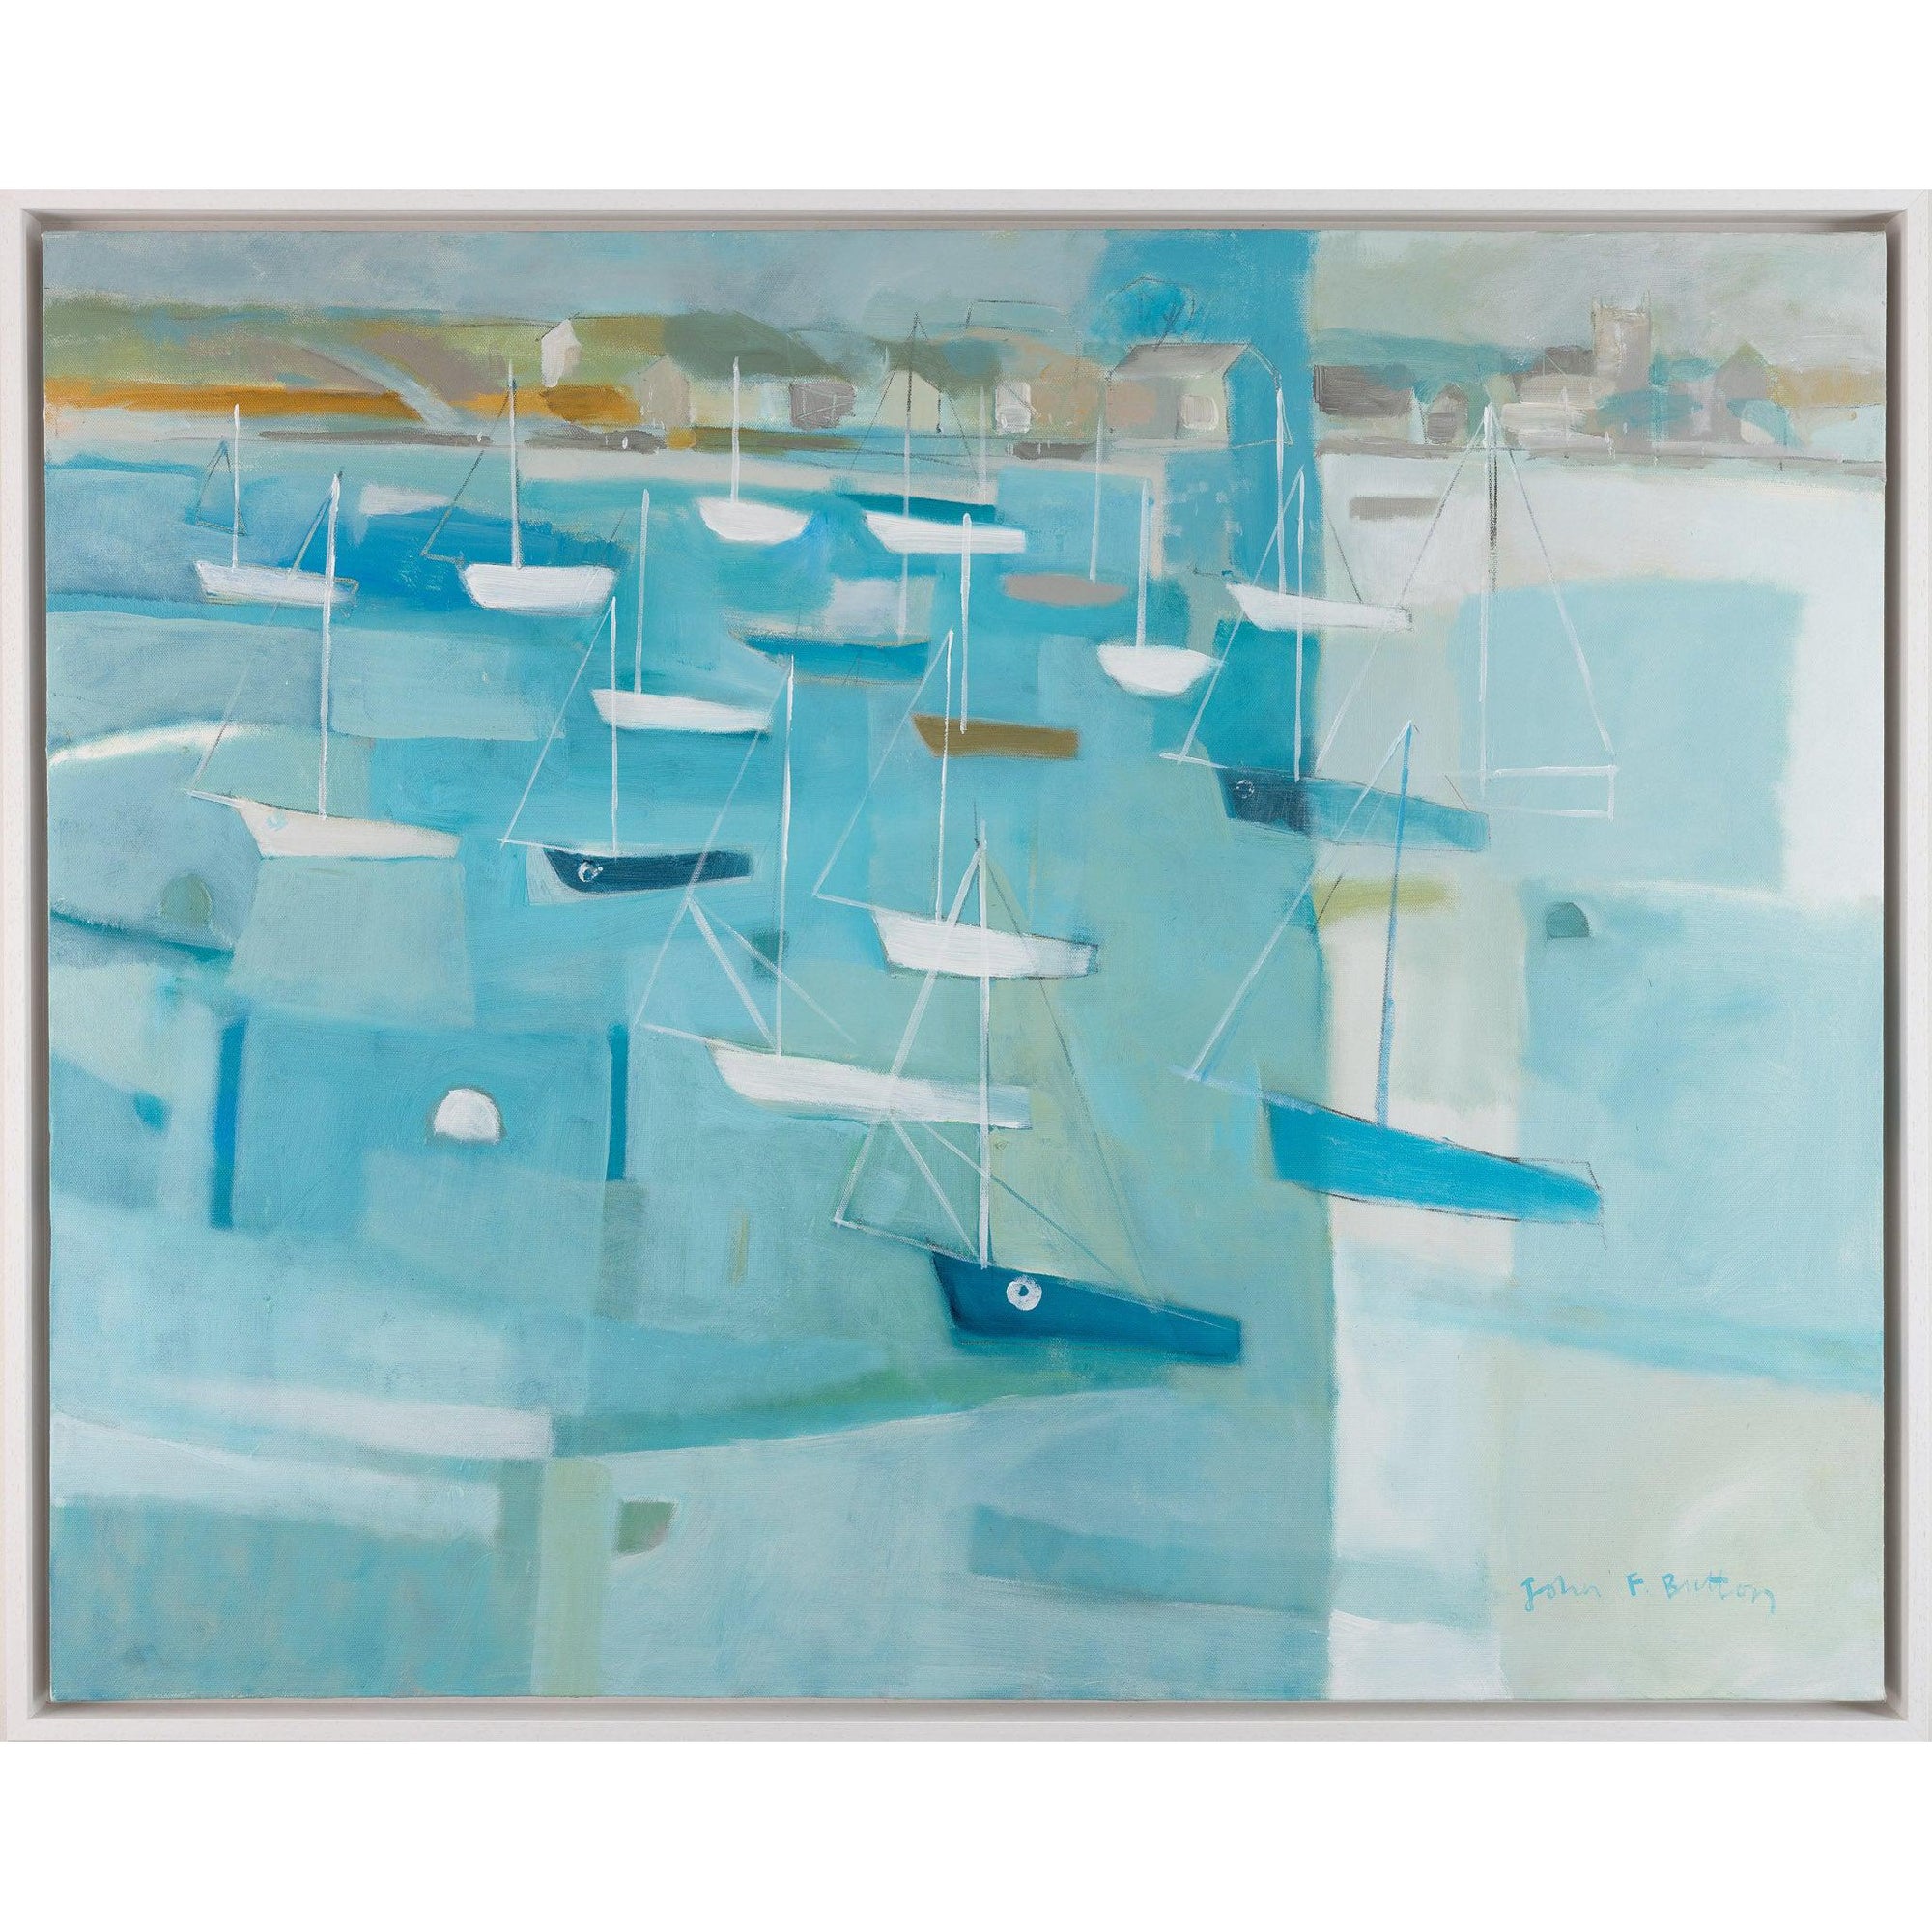 'Across the Camel Estuary, Cornwall' by John Button, available at Padstow Gallery, Cornwall